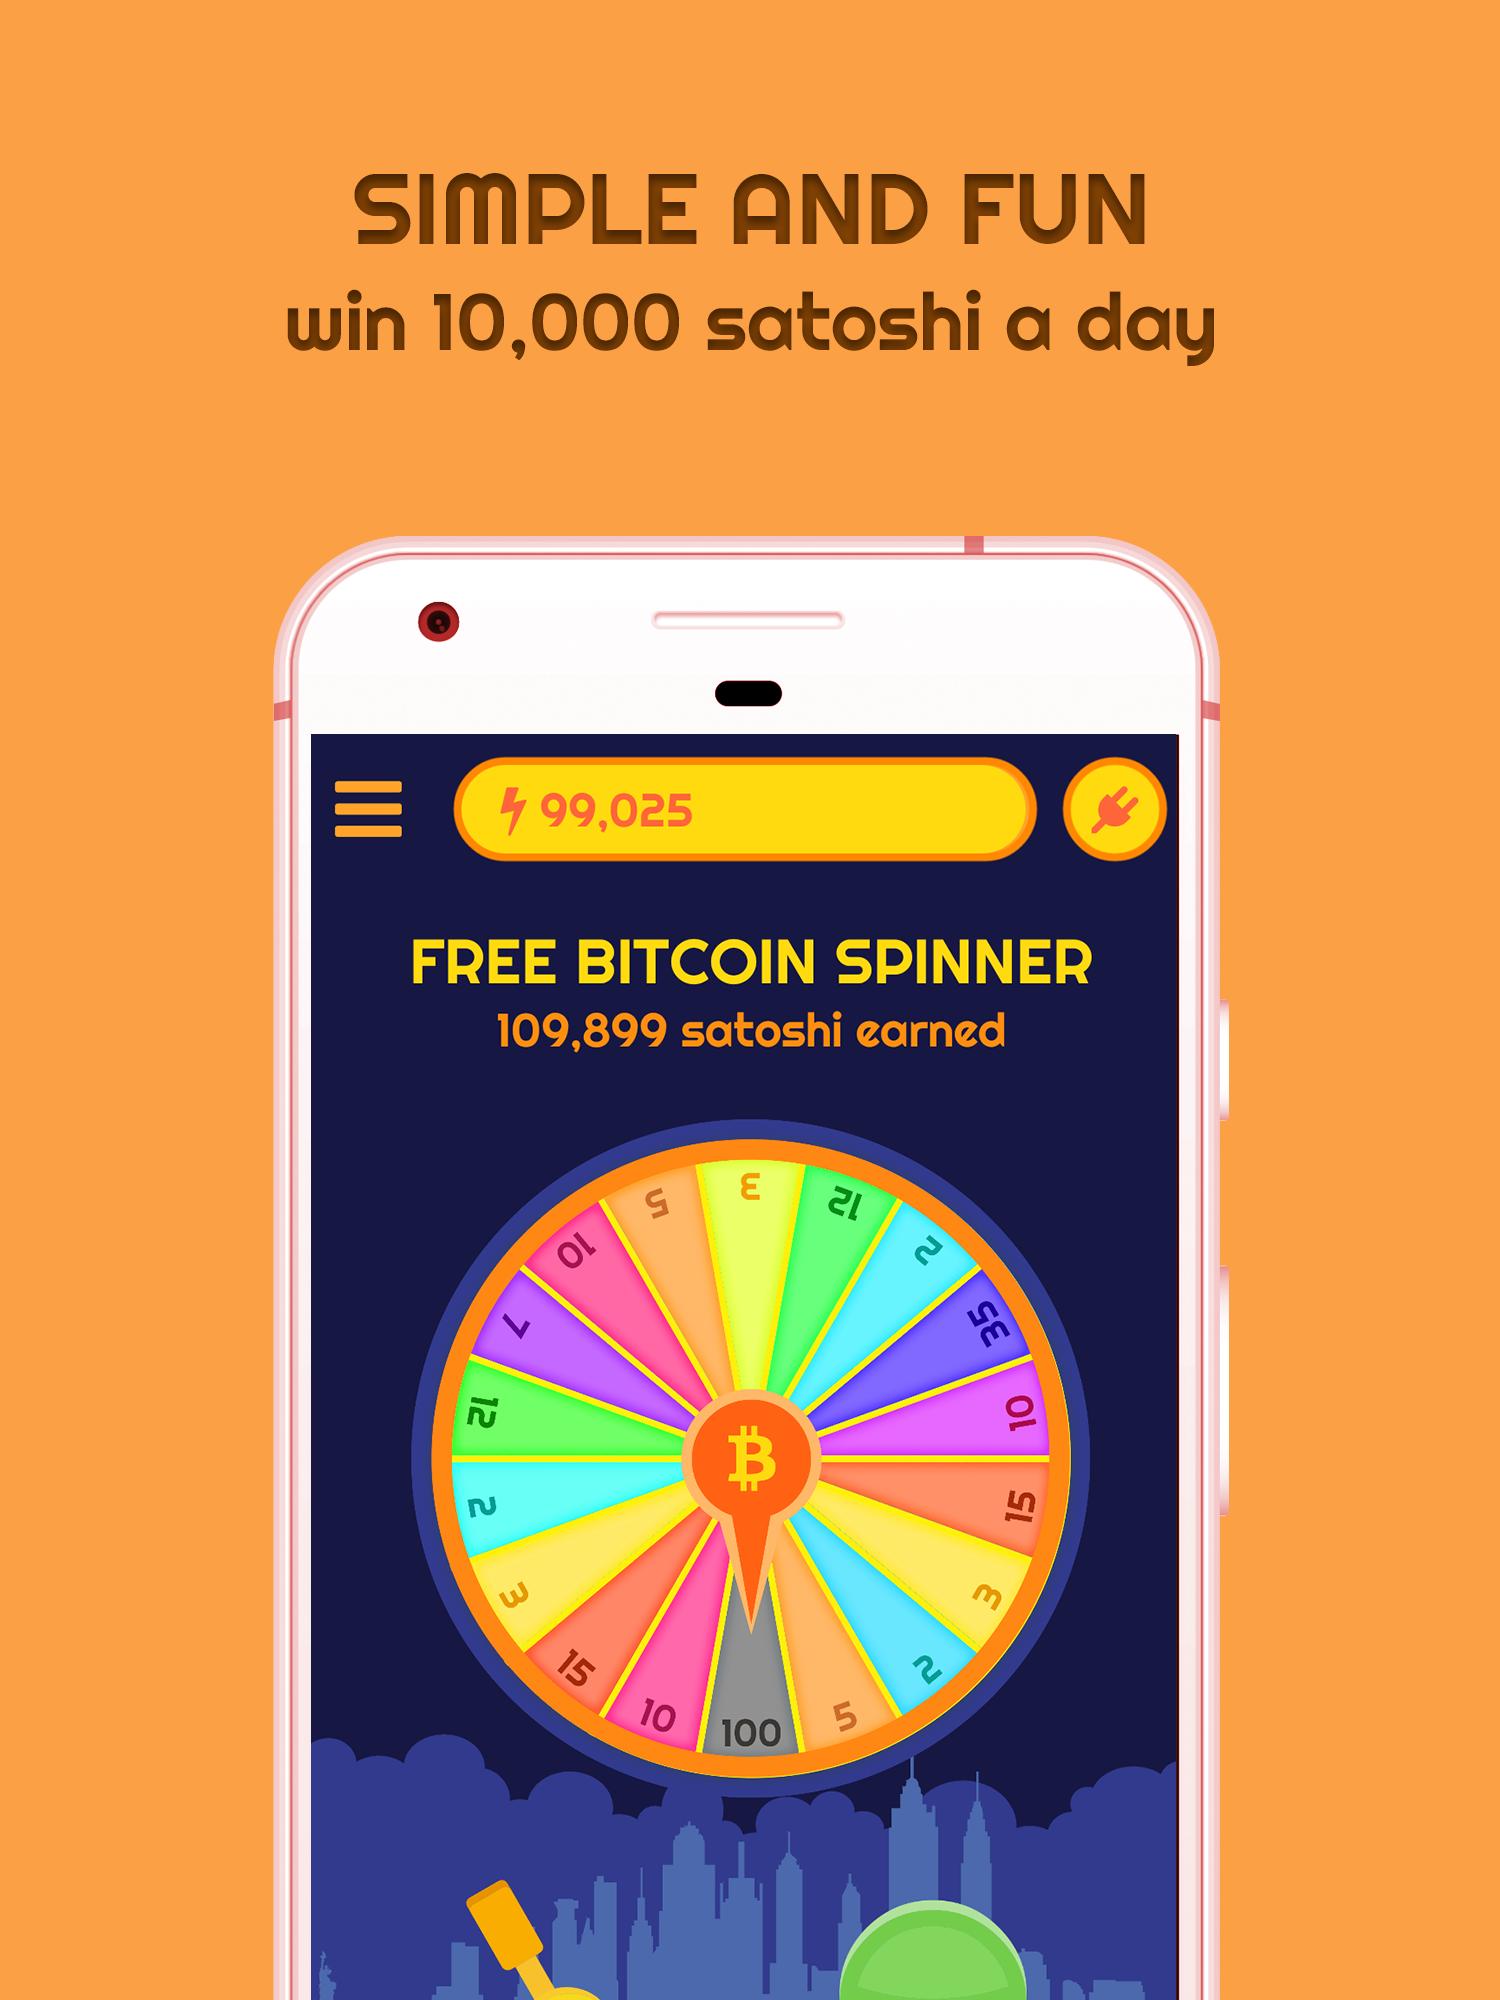 Bitcoin Spinner APK Download - Free - 9Apps